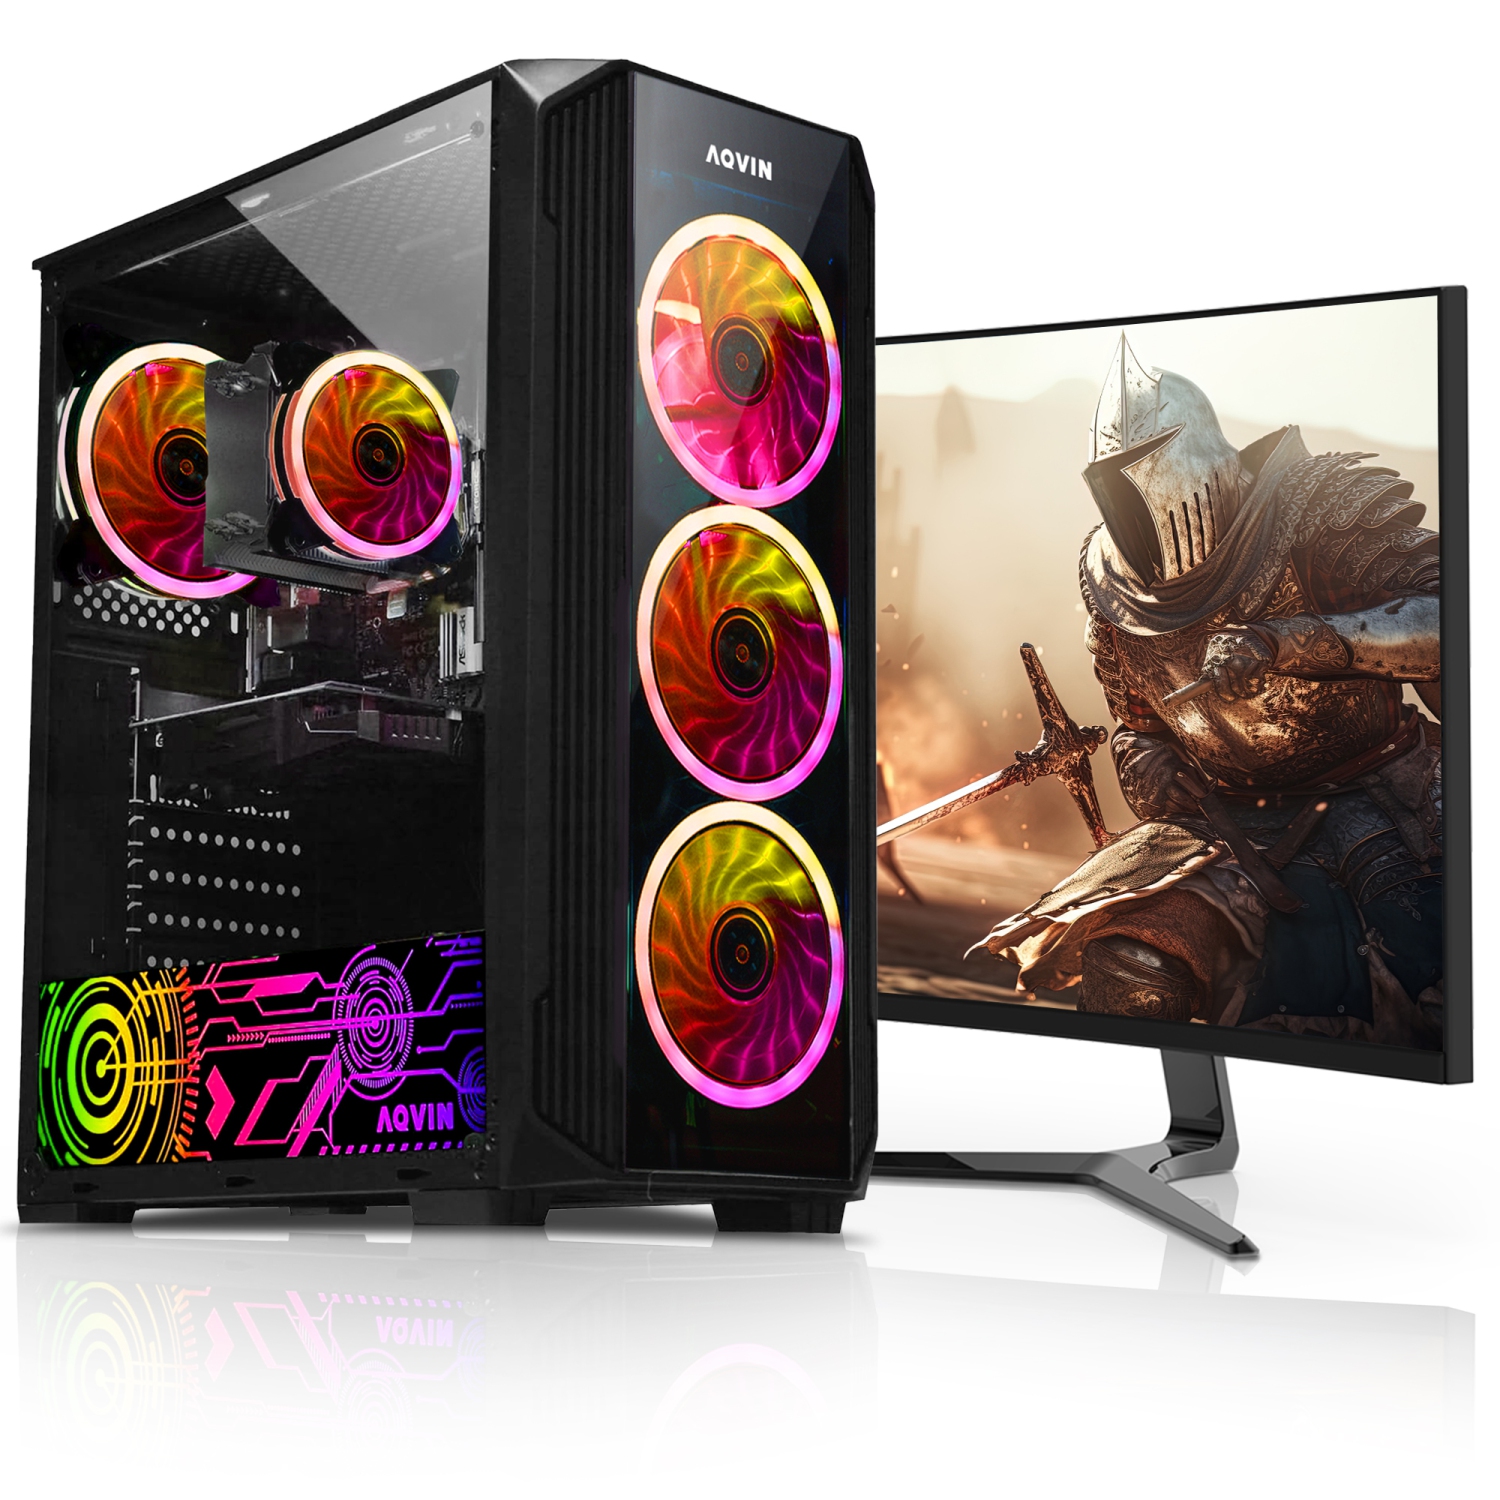 Refurbished (Excellent) - AQVIN ZForce Tower Gaming PC Combo New 24-inch Curved Gaming Monitor Intel Core i7 AMD Graphics RX 580 8GB HDMI 32GB DDR4 RAM 2TB SSD Windows 10 Pro